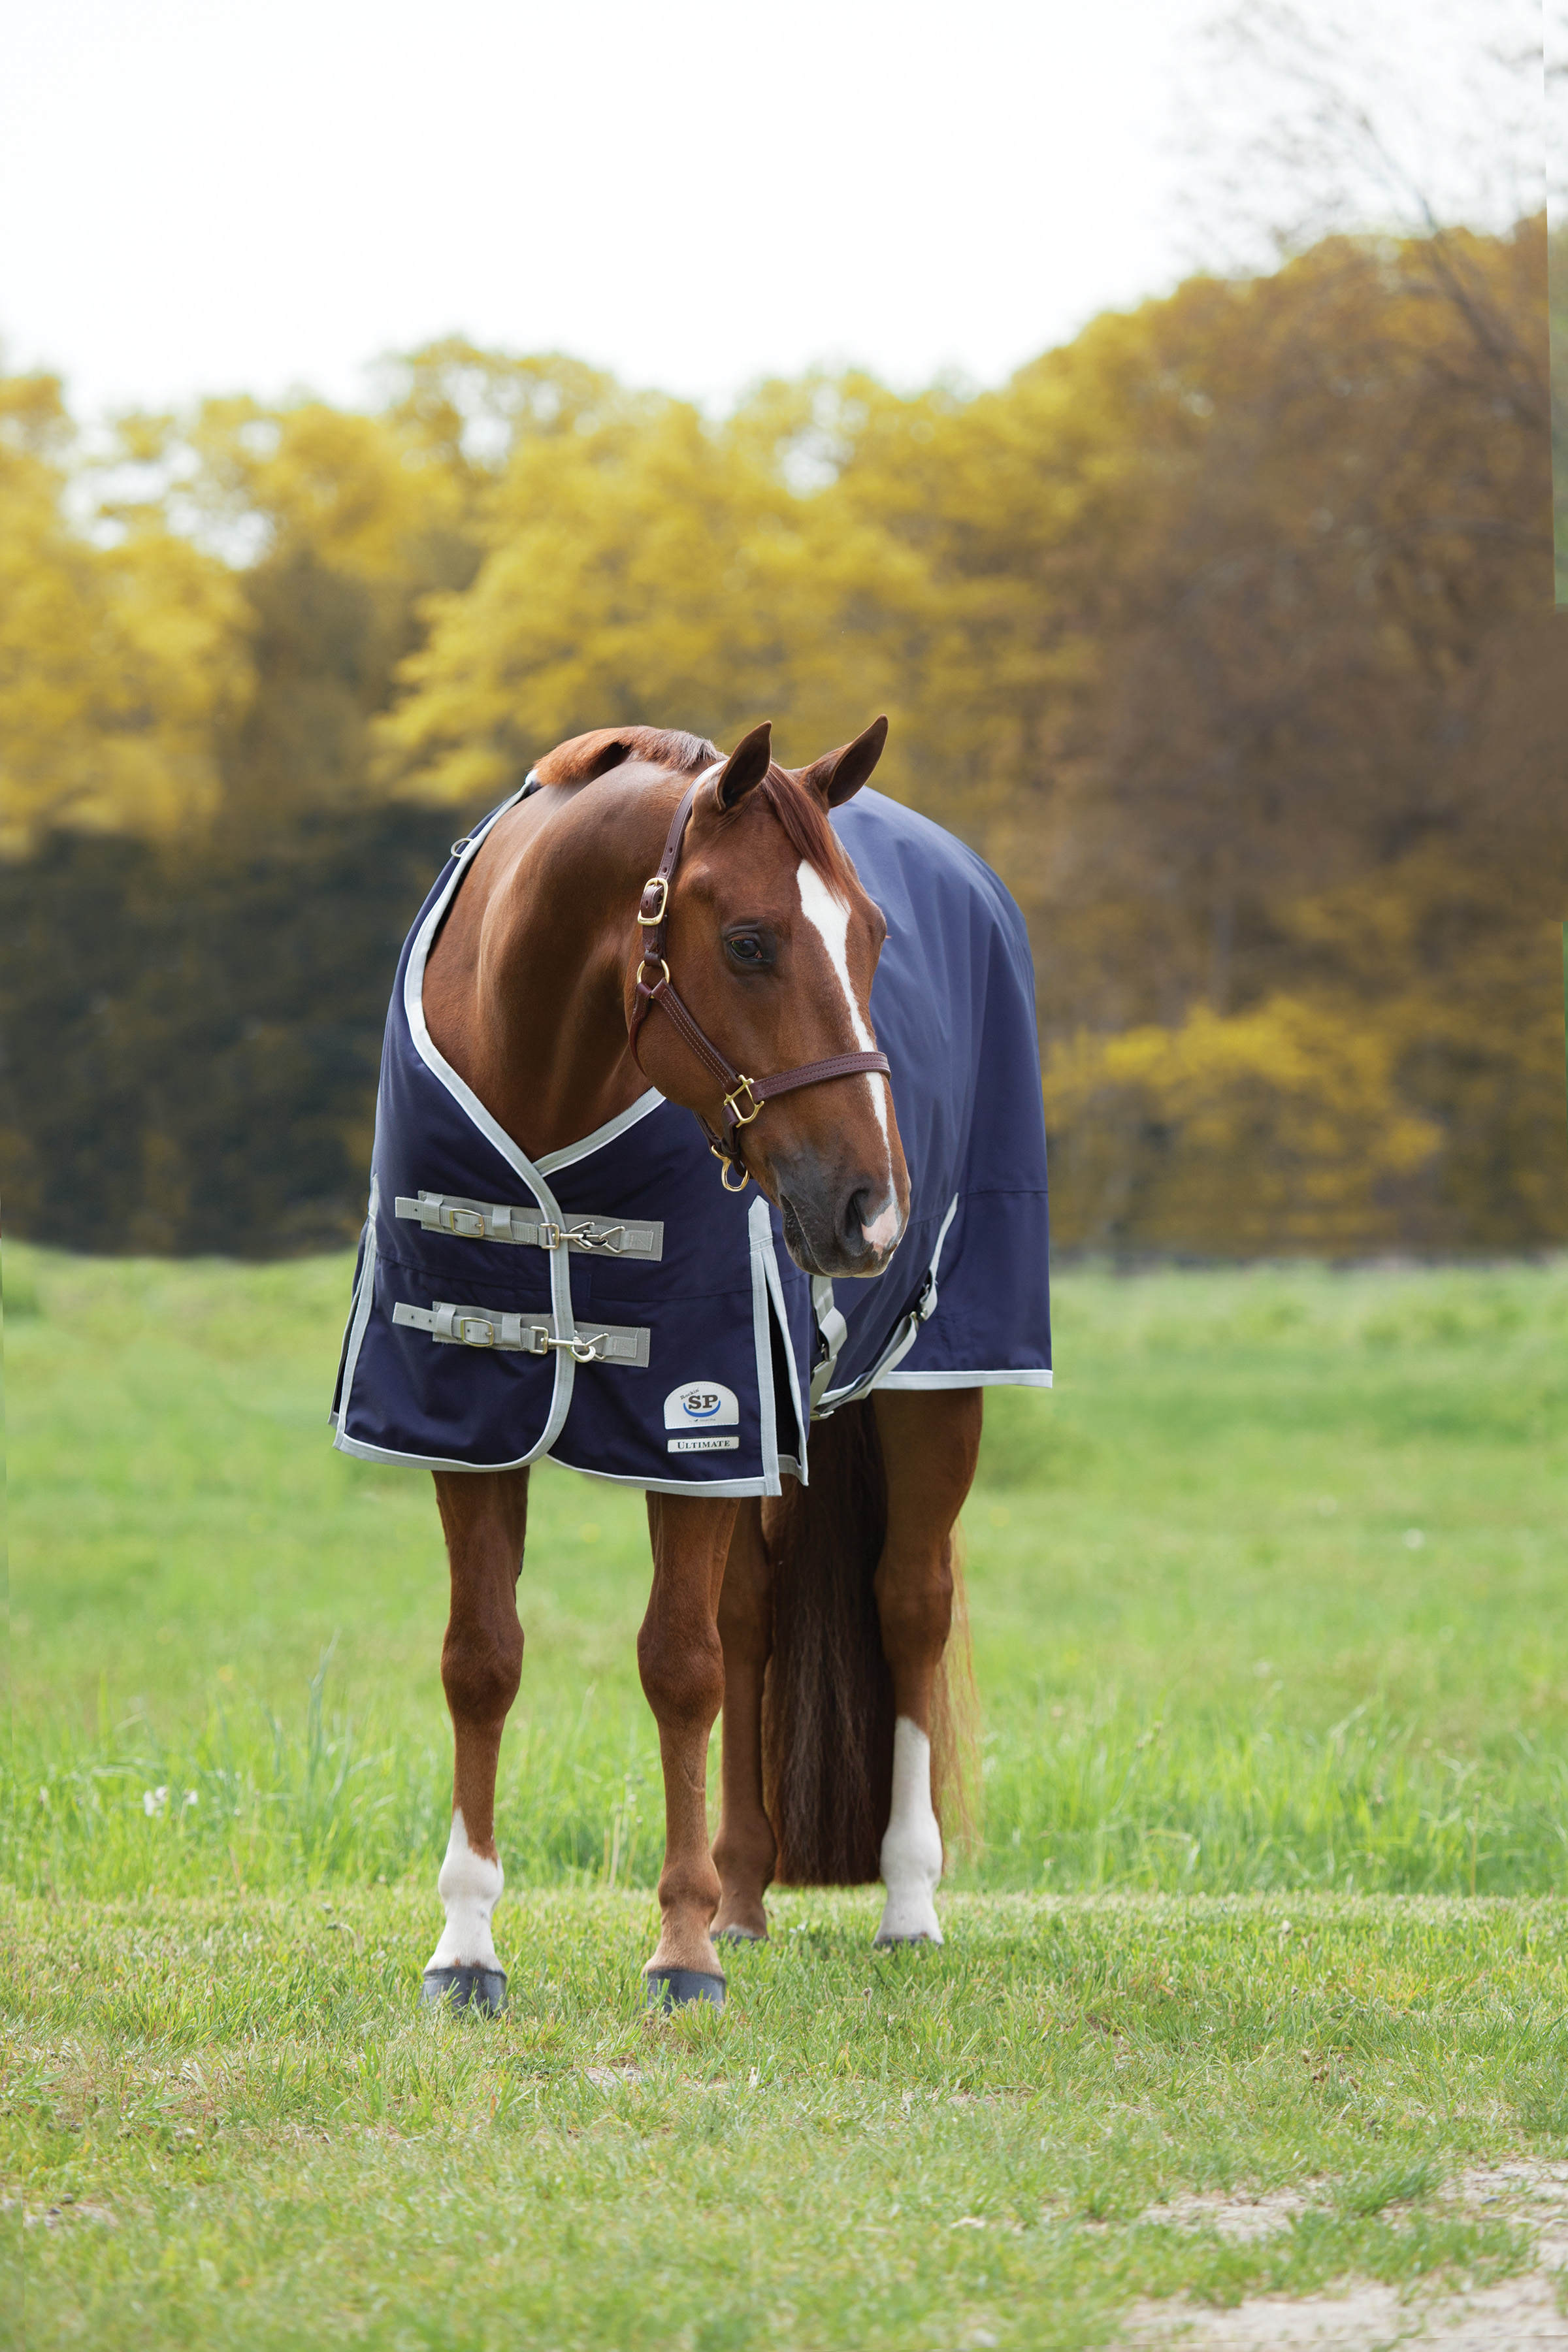 Does Your Horse Need SmartPak’s 10-Year Indestructible Blanket Guarantee?